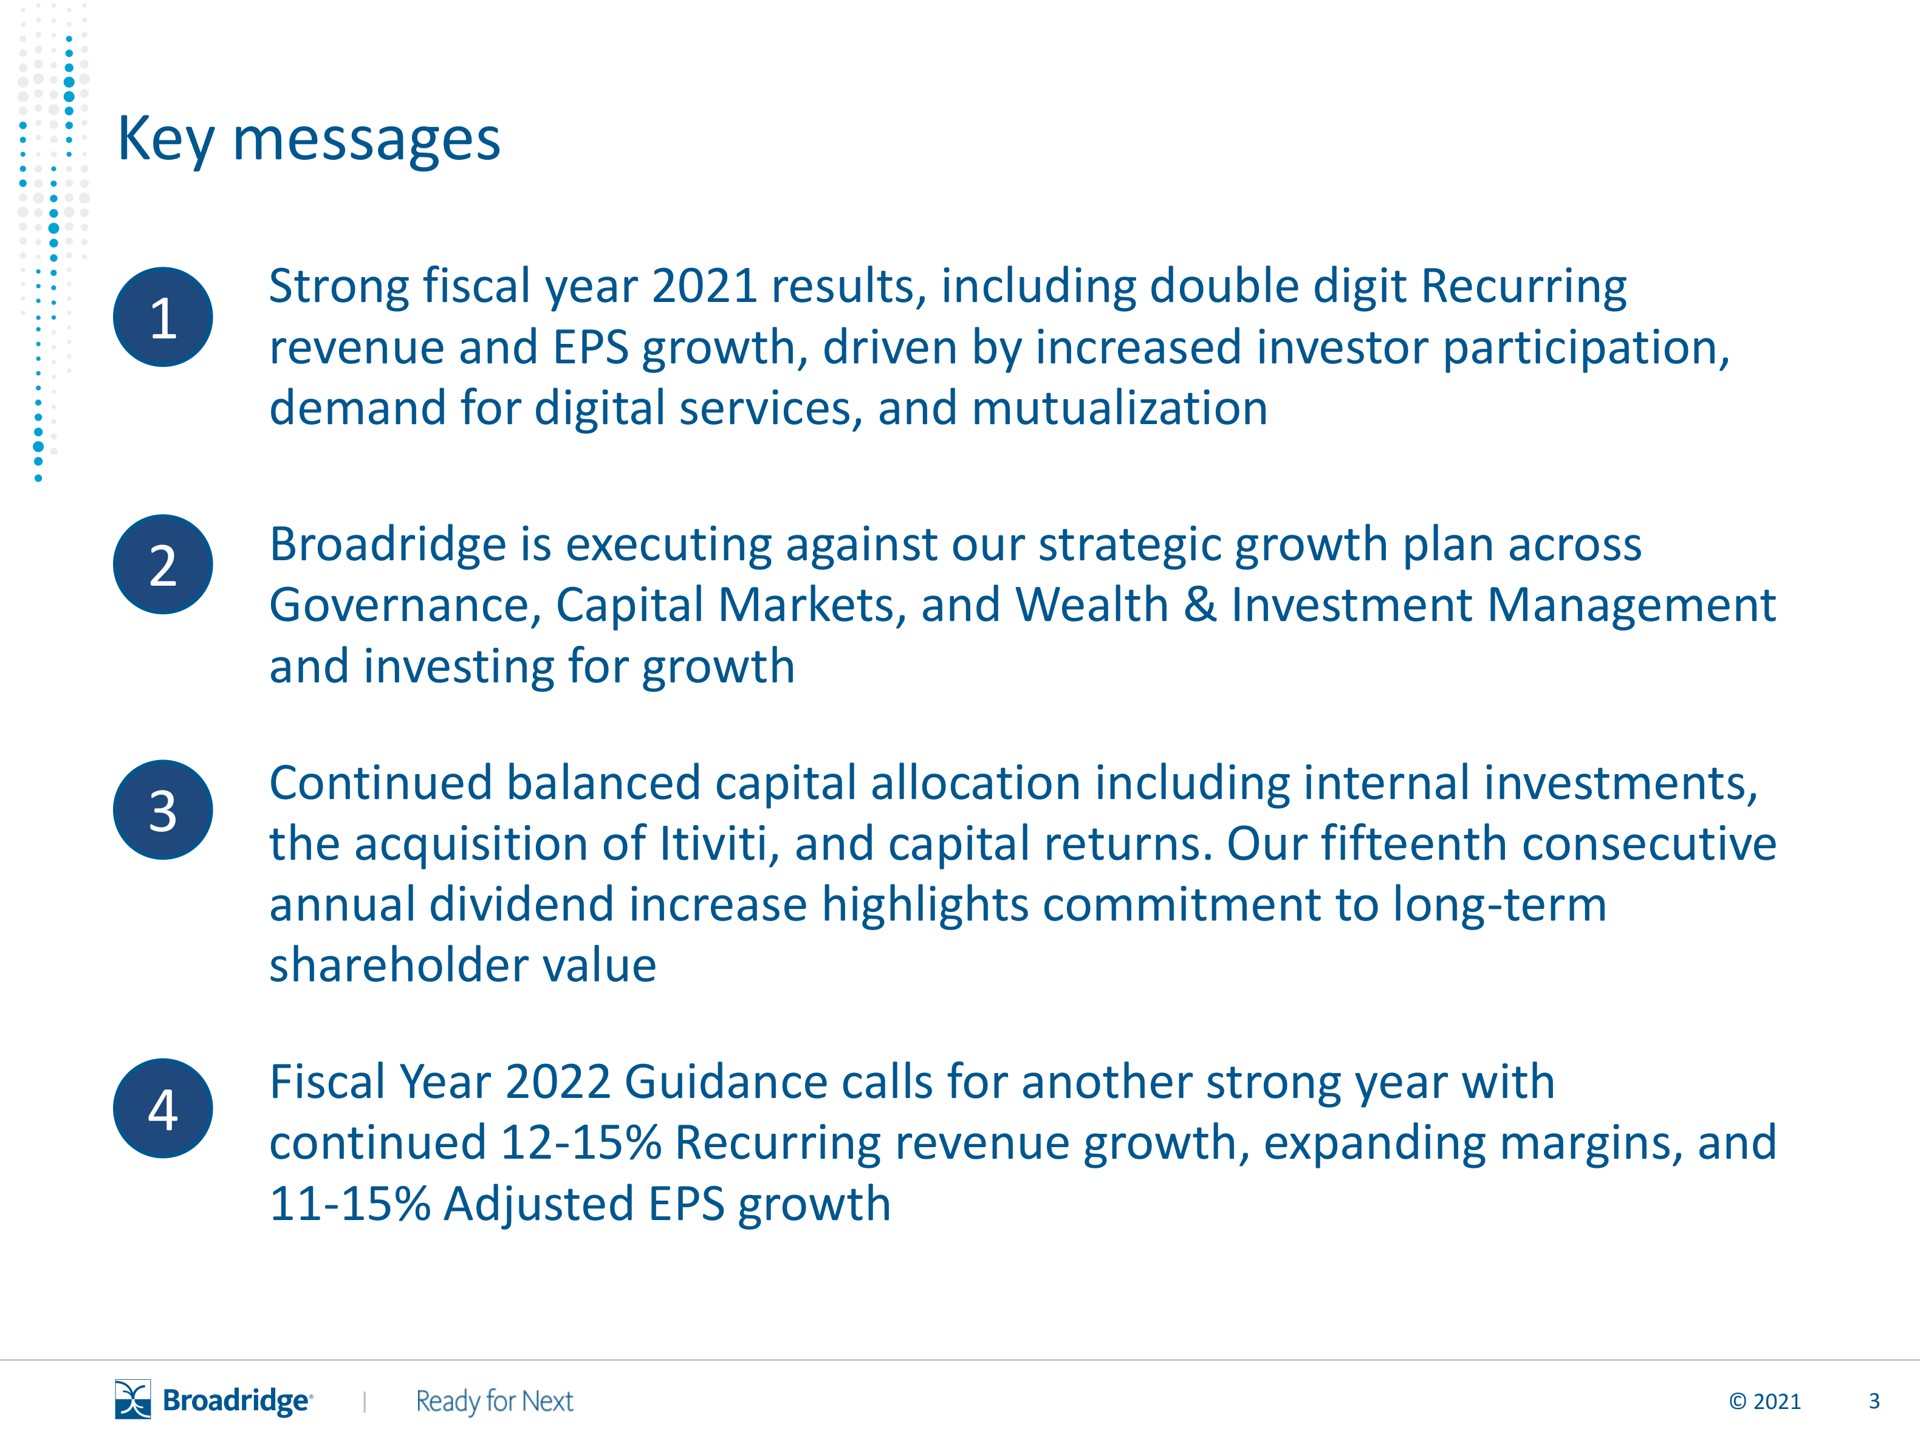 key messages strong fiscal year results including double digit recurring revenue and growth driven by increased investor participation demand for digital services and mutualization is executing against our strategic growth plan across governance capital markets and wealth investment management and investing for growth continued balanced capital allocation including internal investments the acquisition of and capital returns our fifteenth consecutive annual dividend increase highlights commitment to long term shareholder value fiscal year guidance calls for another strong year with continued recurring revenue growth expanding margins and adjusted growth | Broadridge Financial Solutions